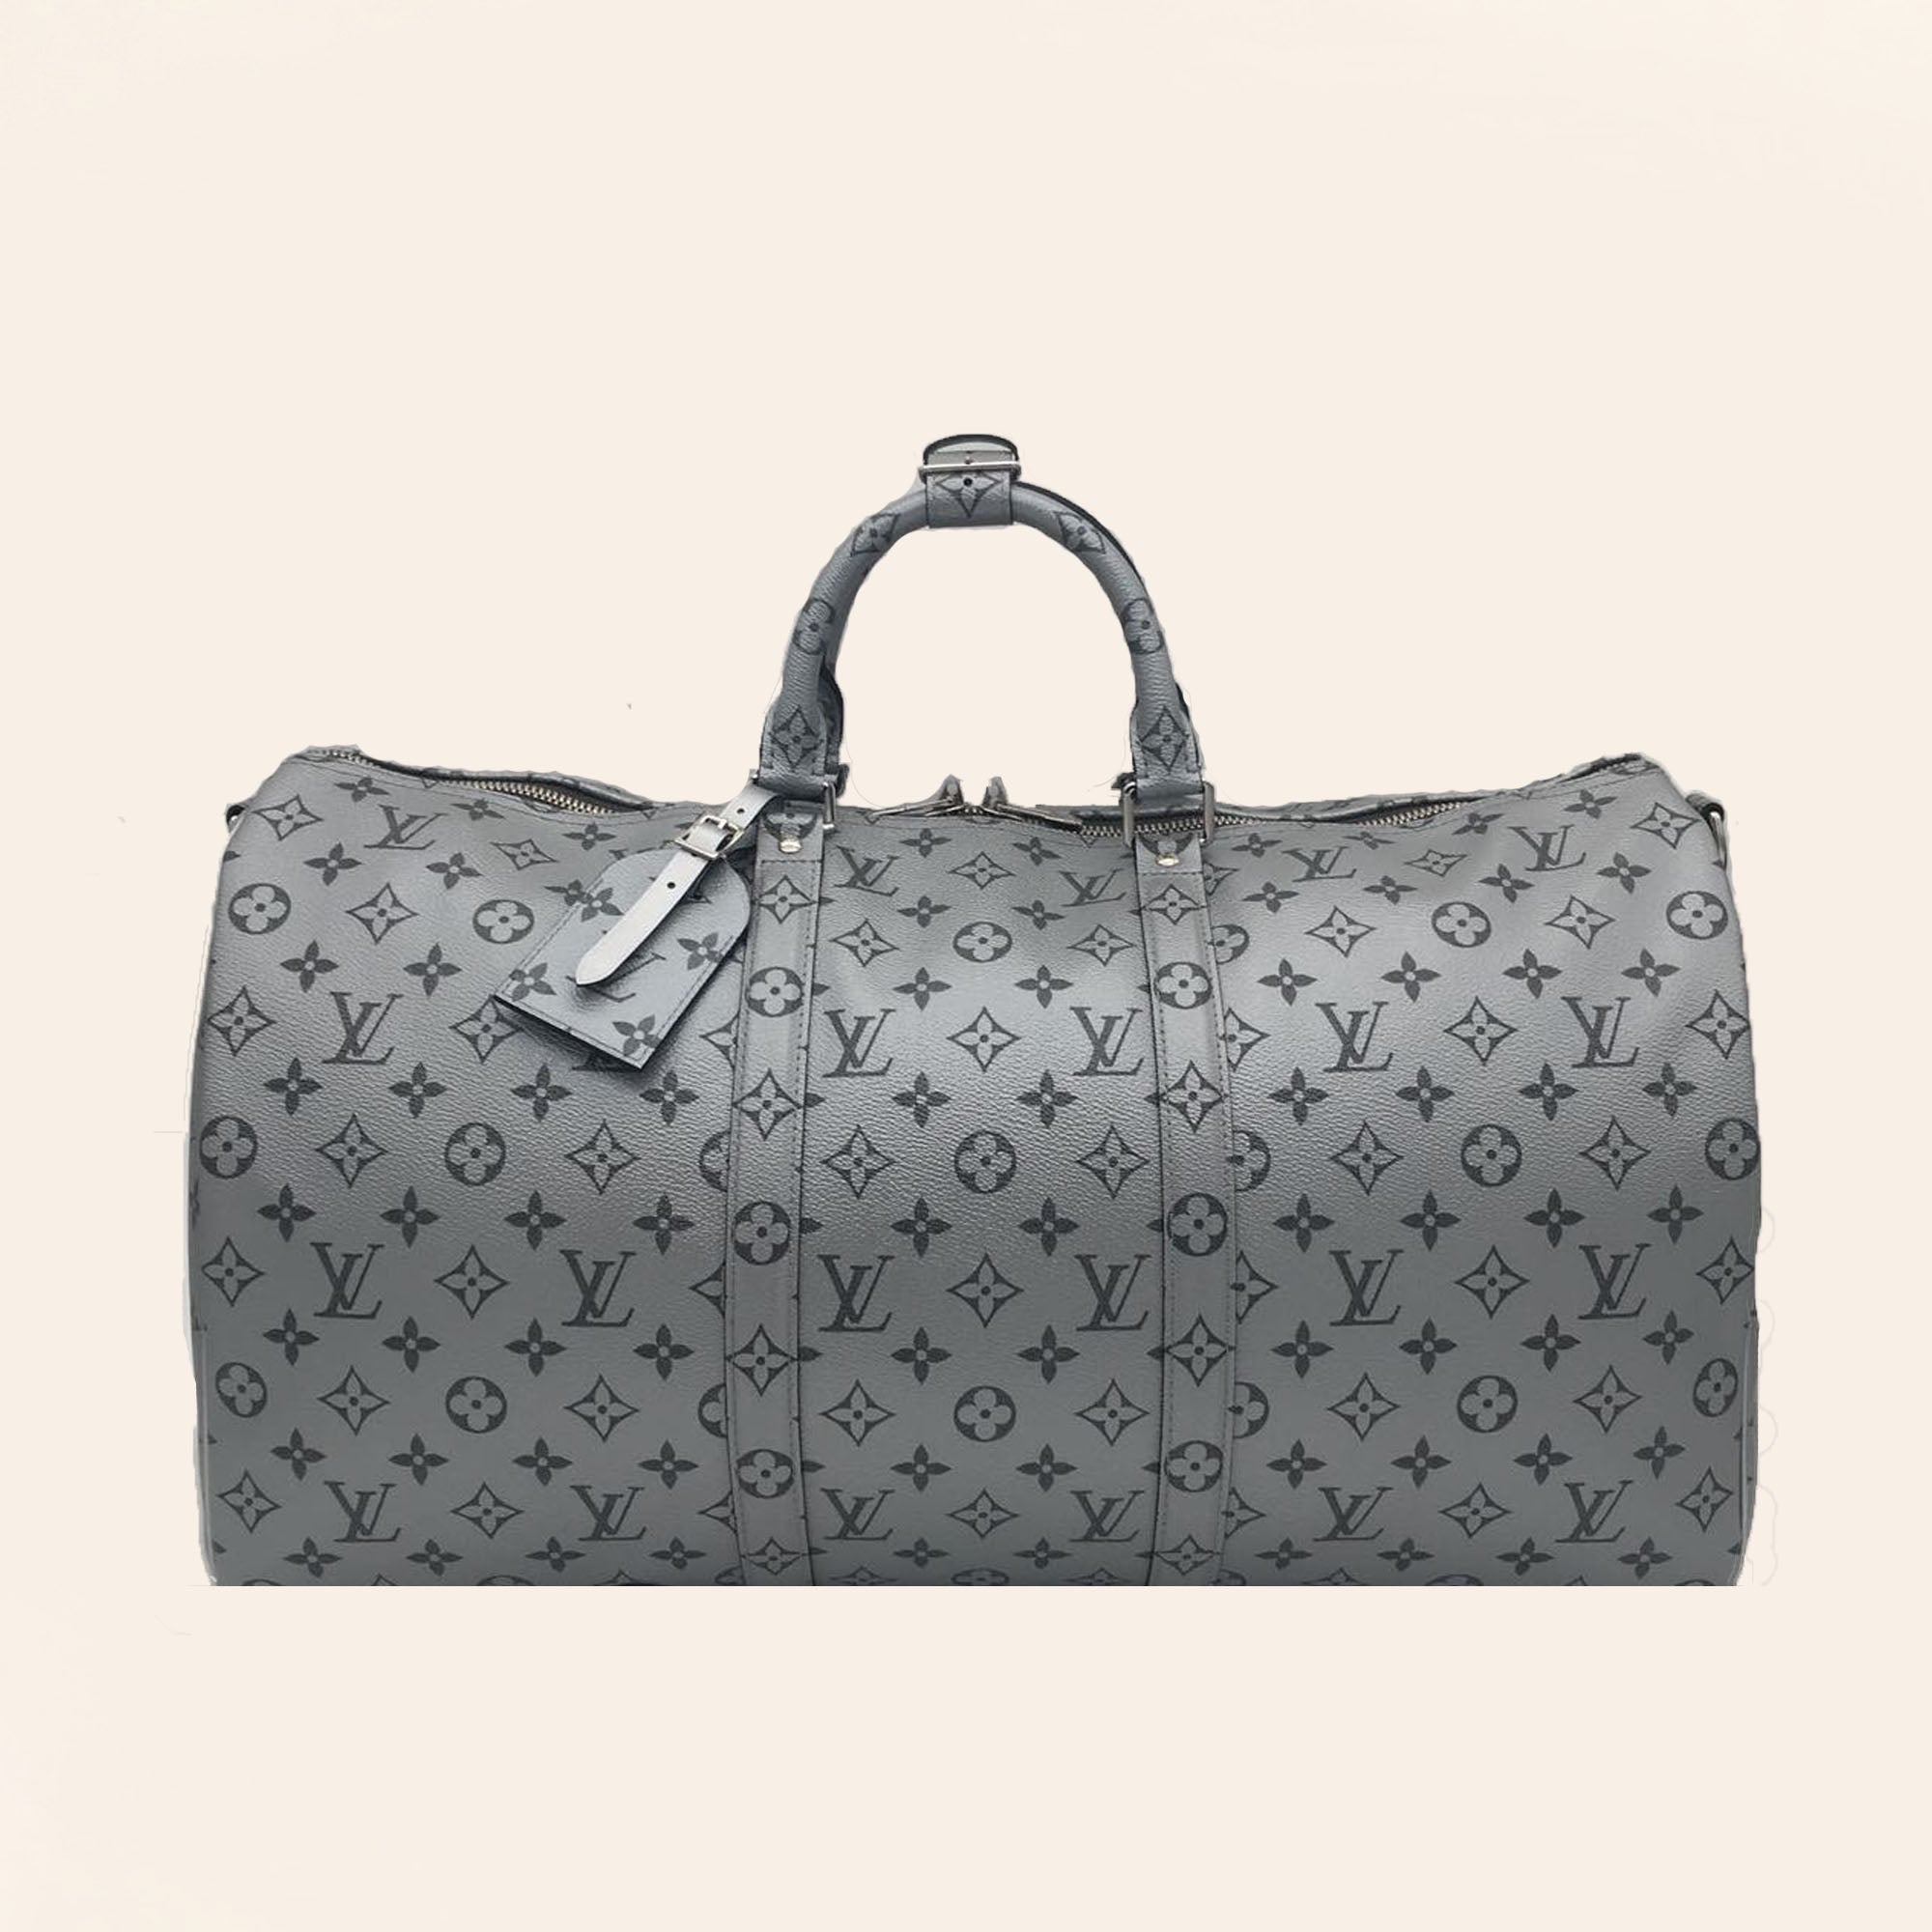 BRAND NEW-Limited edition Louis Vuitton keepall 50 Clouds virgil